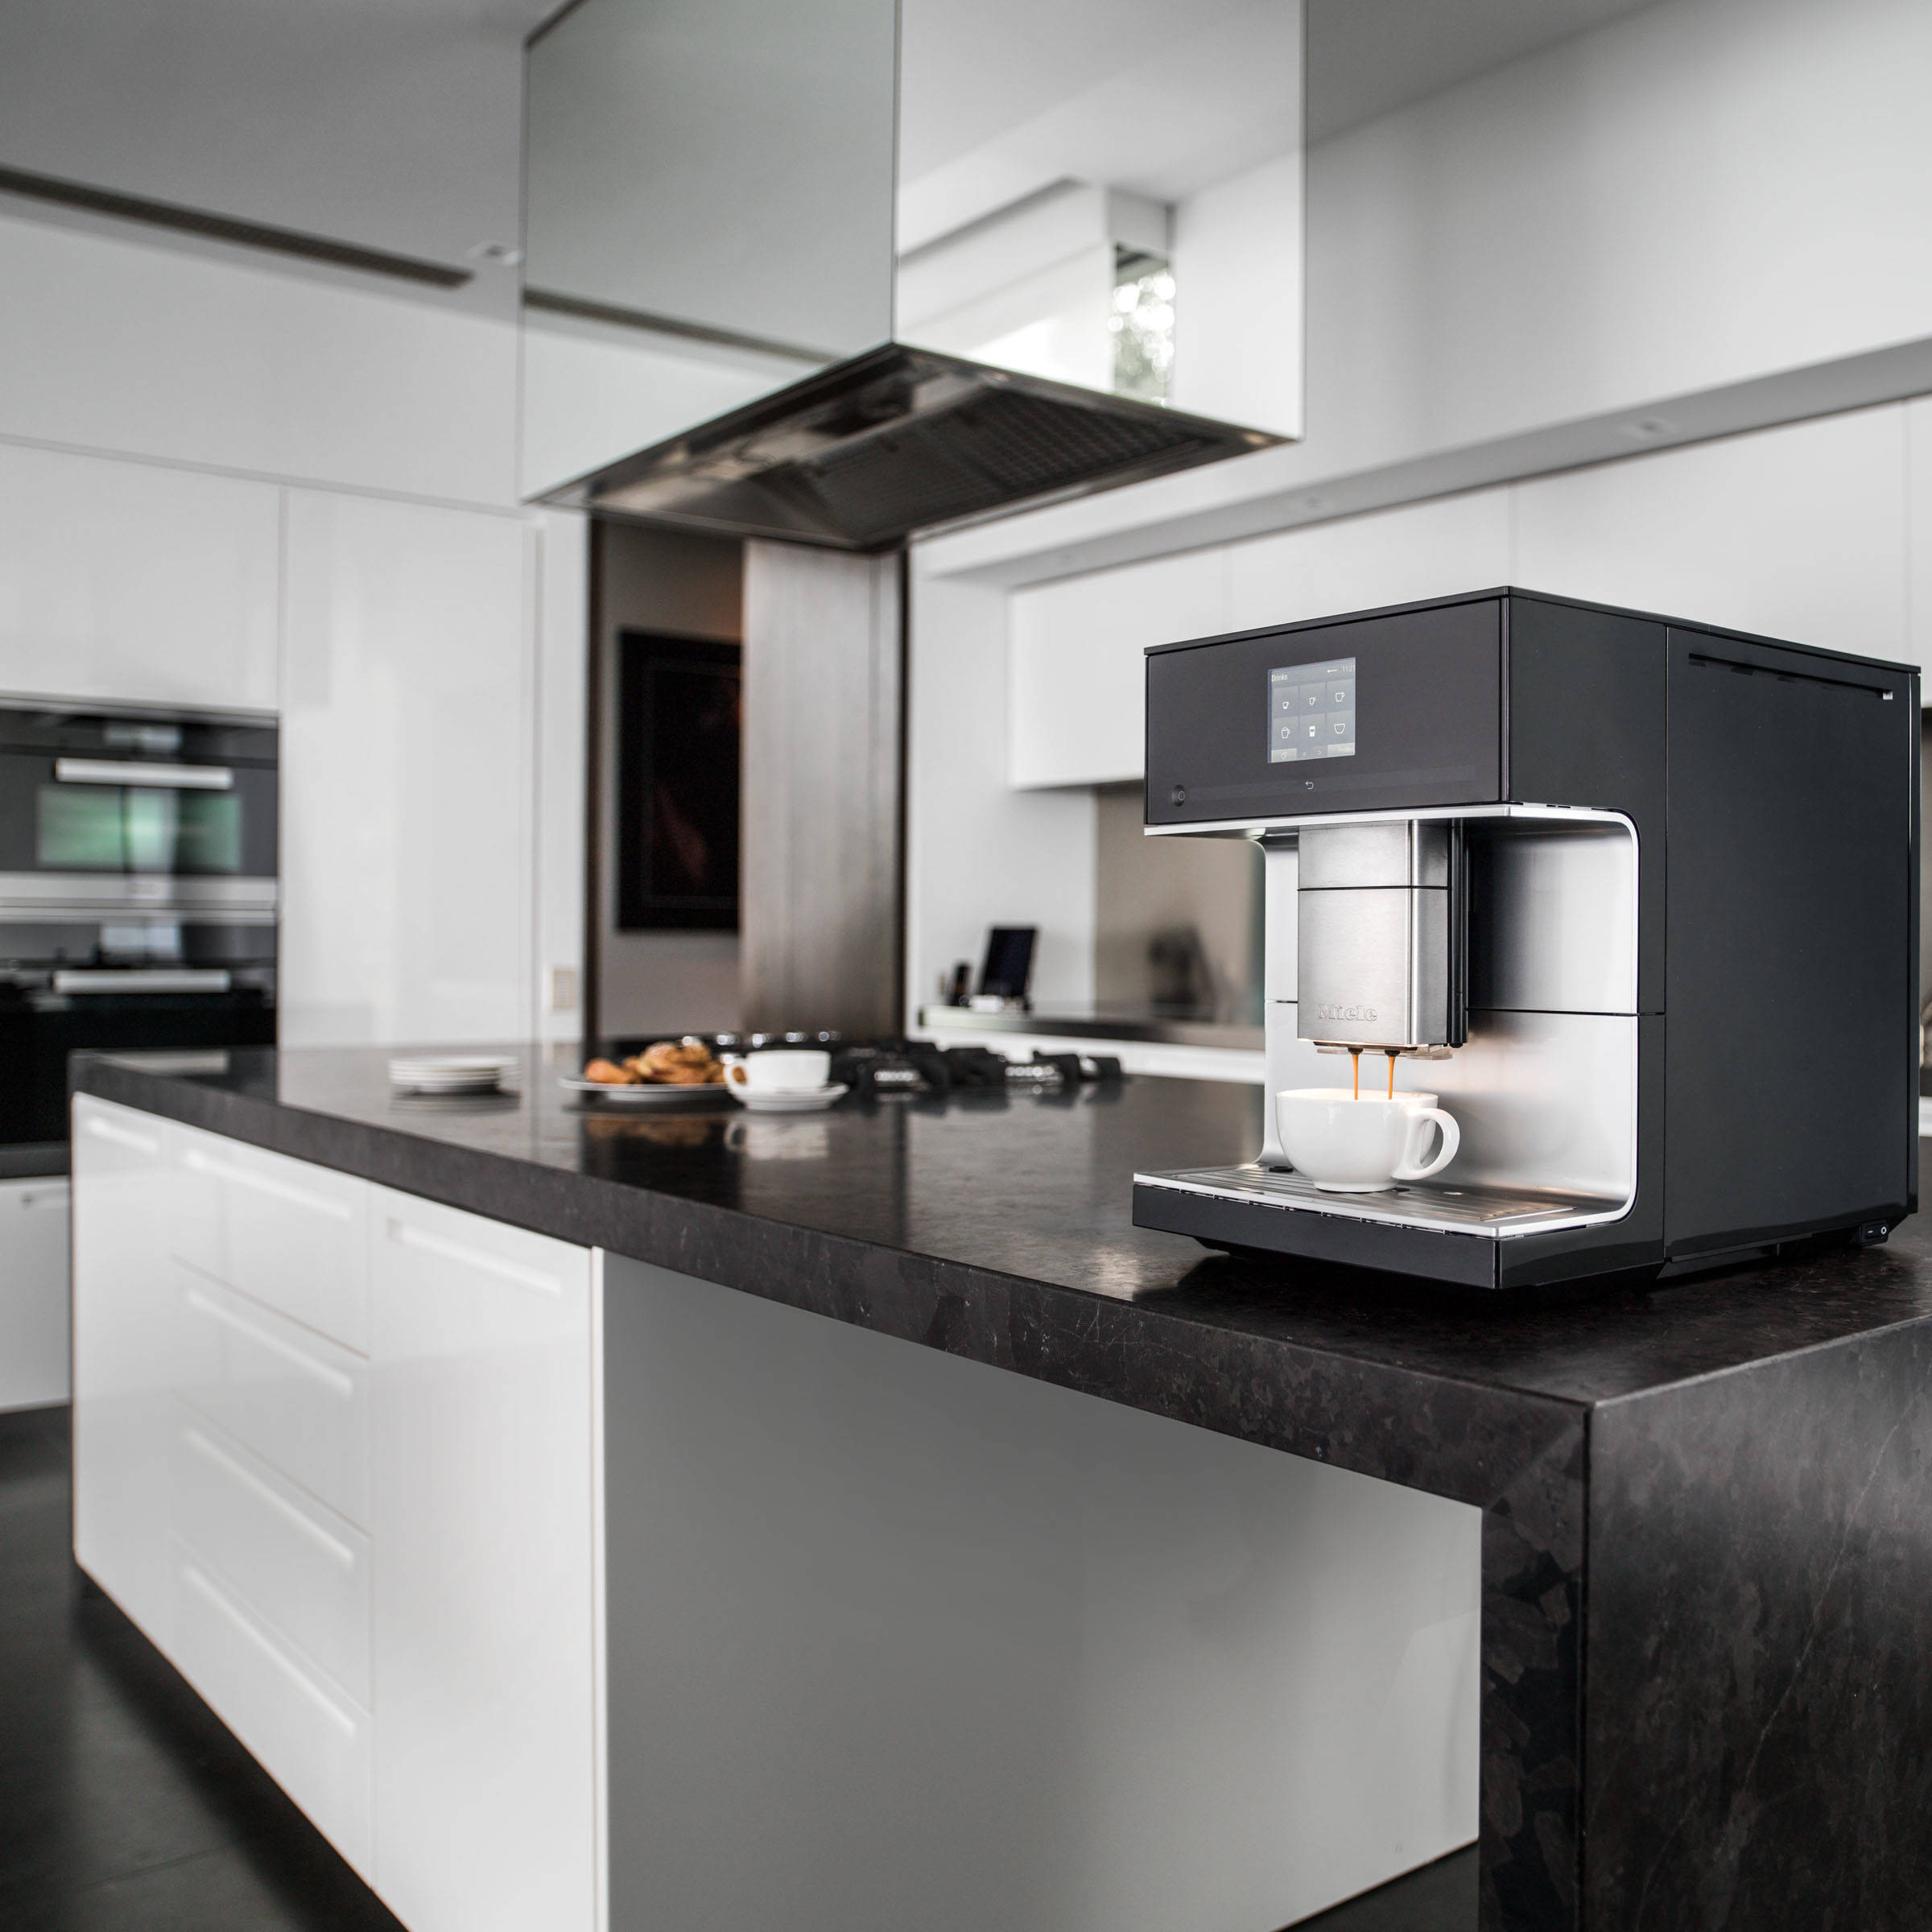 Coffee In The Kitchen - Contemporary - Kitchen - Oxfordshire - by Miele GB  | Houzz